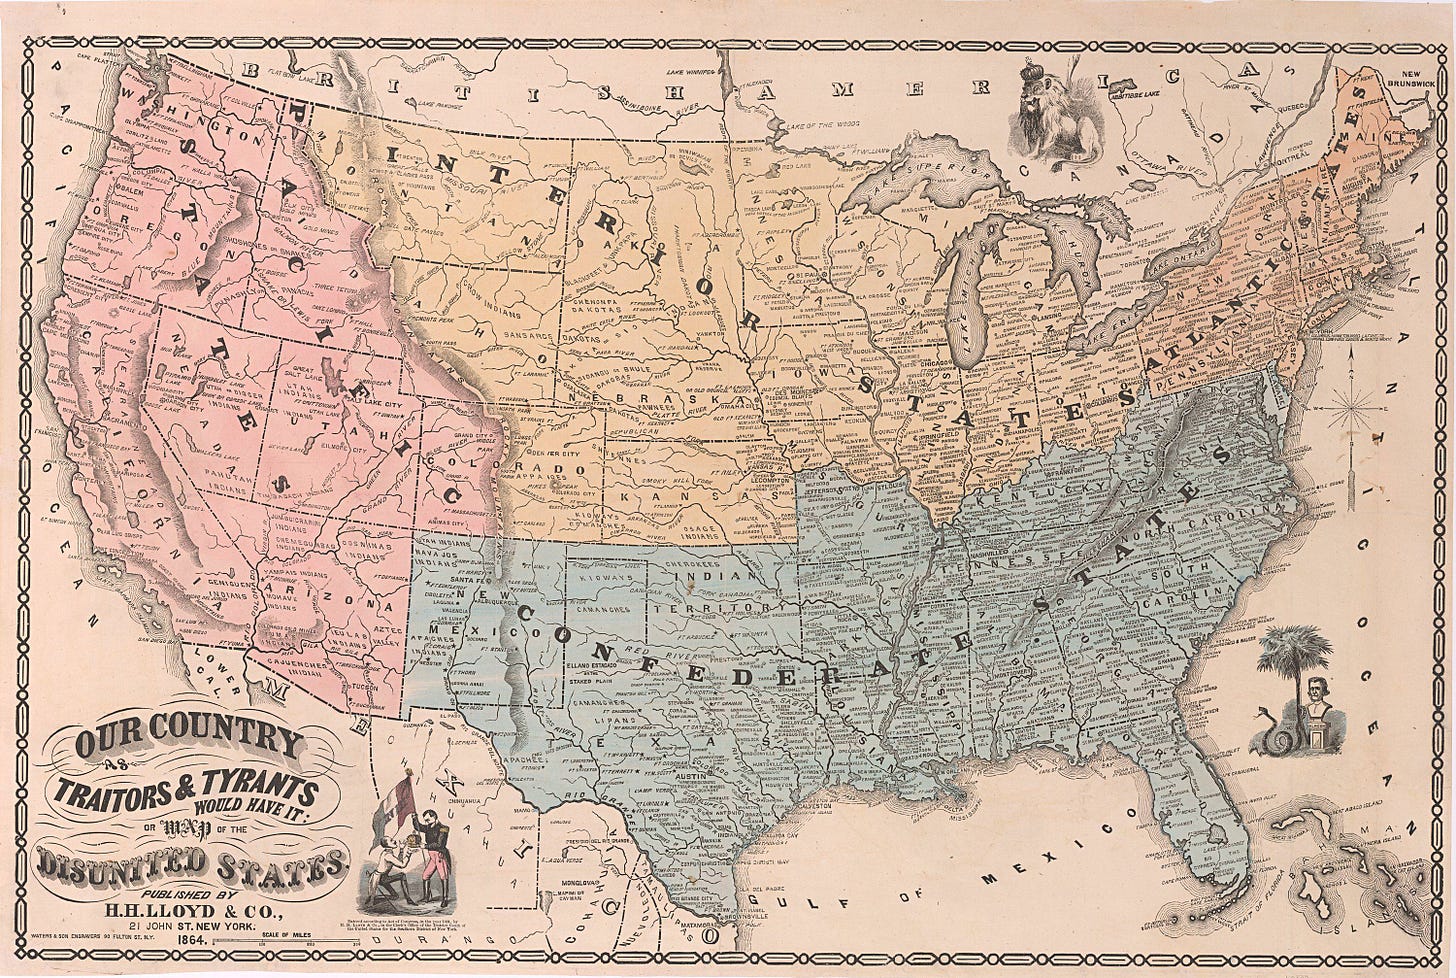 The US, as Traitors and Tyrants Would Have It (1864)